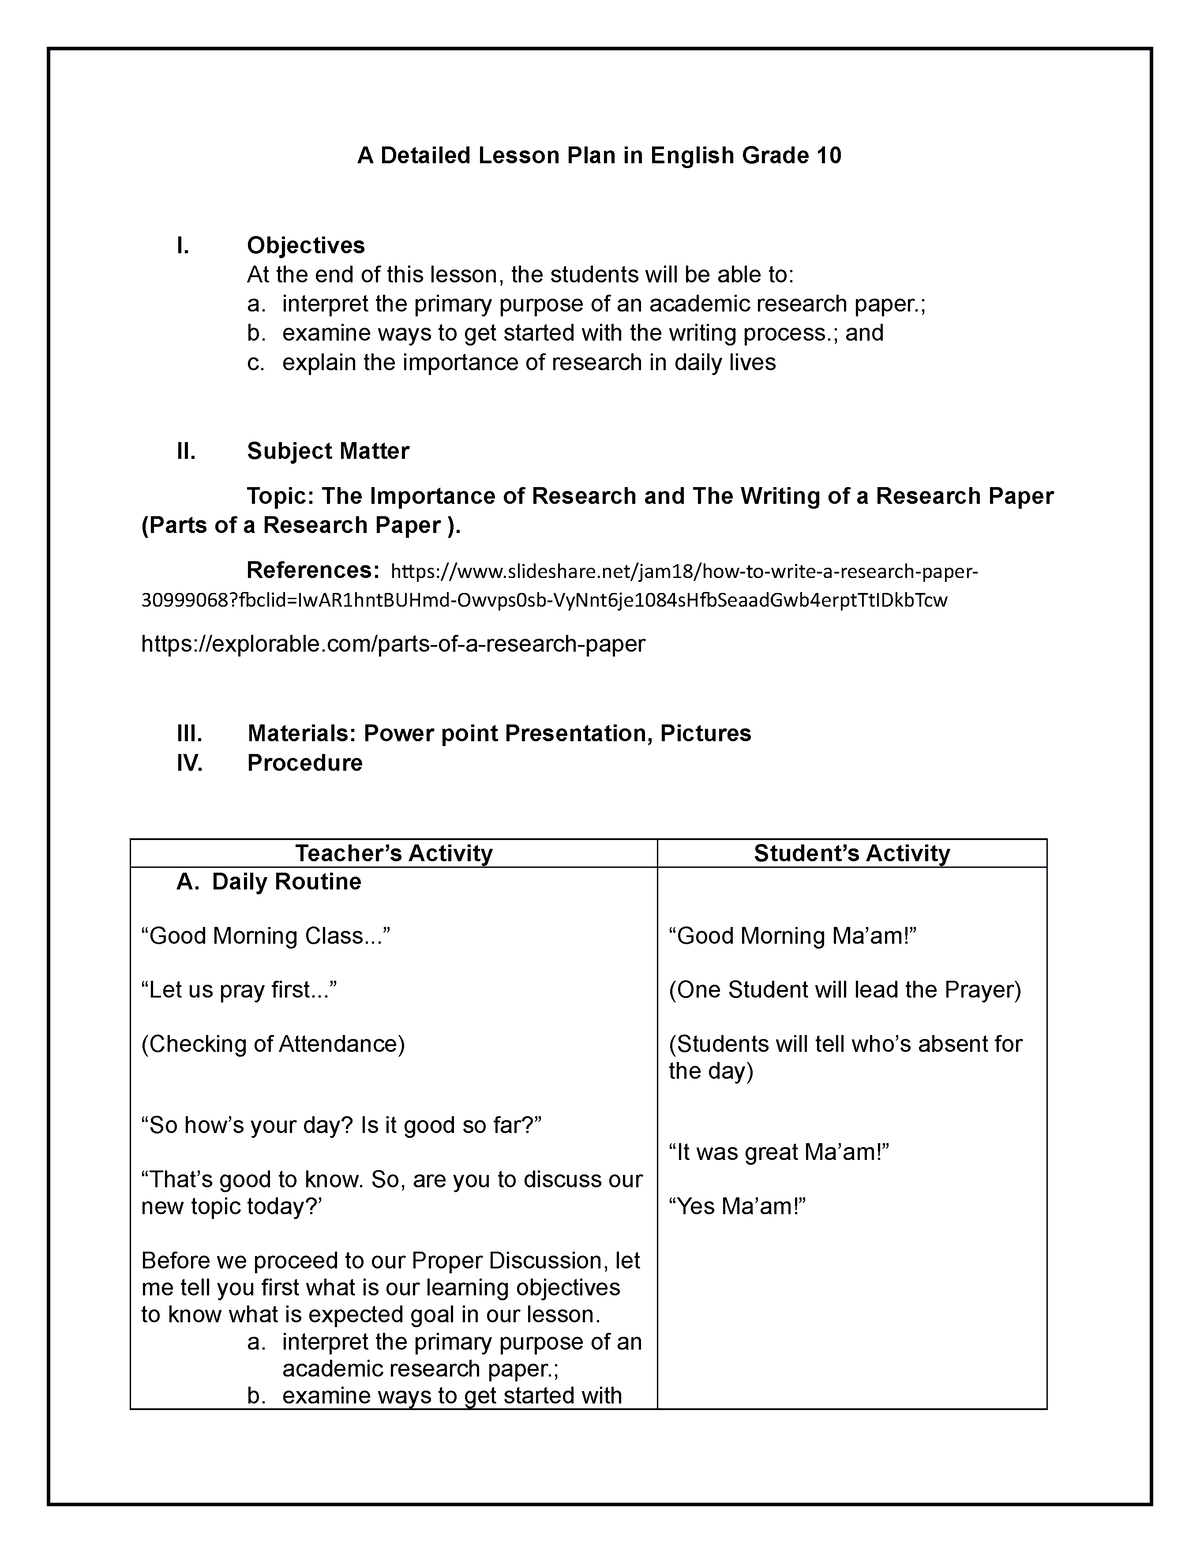 parts of research paper lesson plan